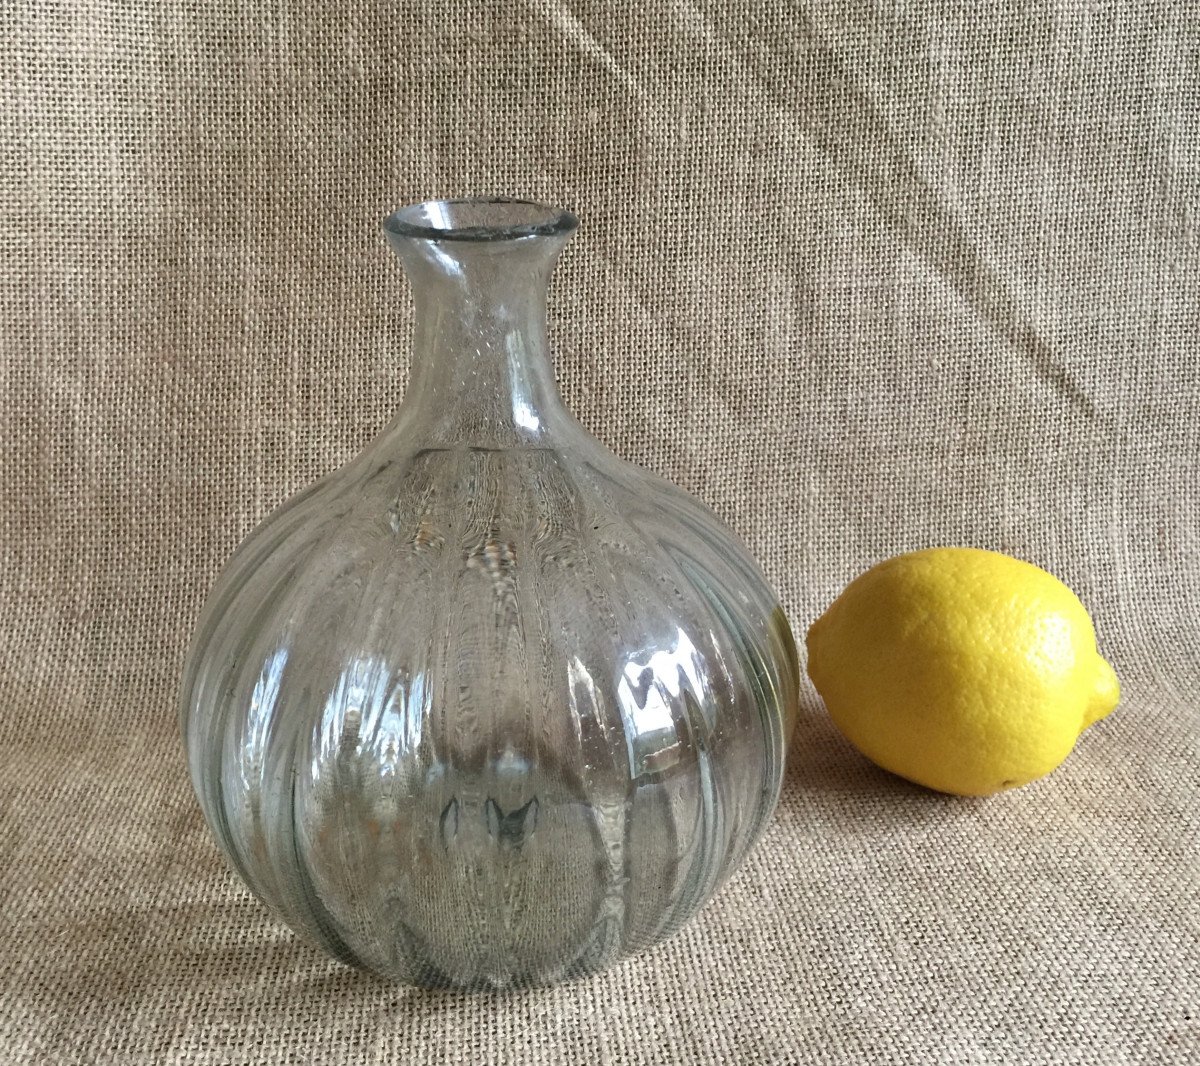 Late 18th Century Decanter In Ringed Globular Shape - Slightly Smoked Glass - Normandy Glassware?